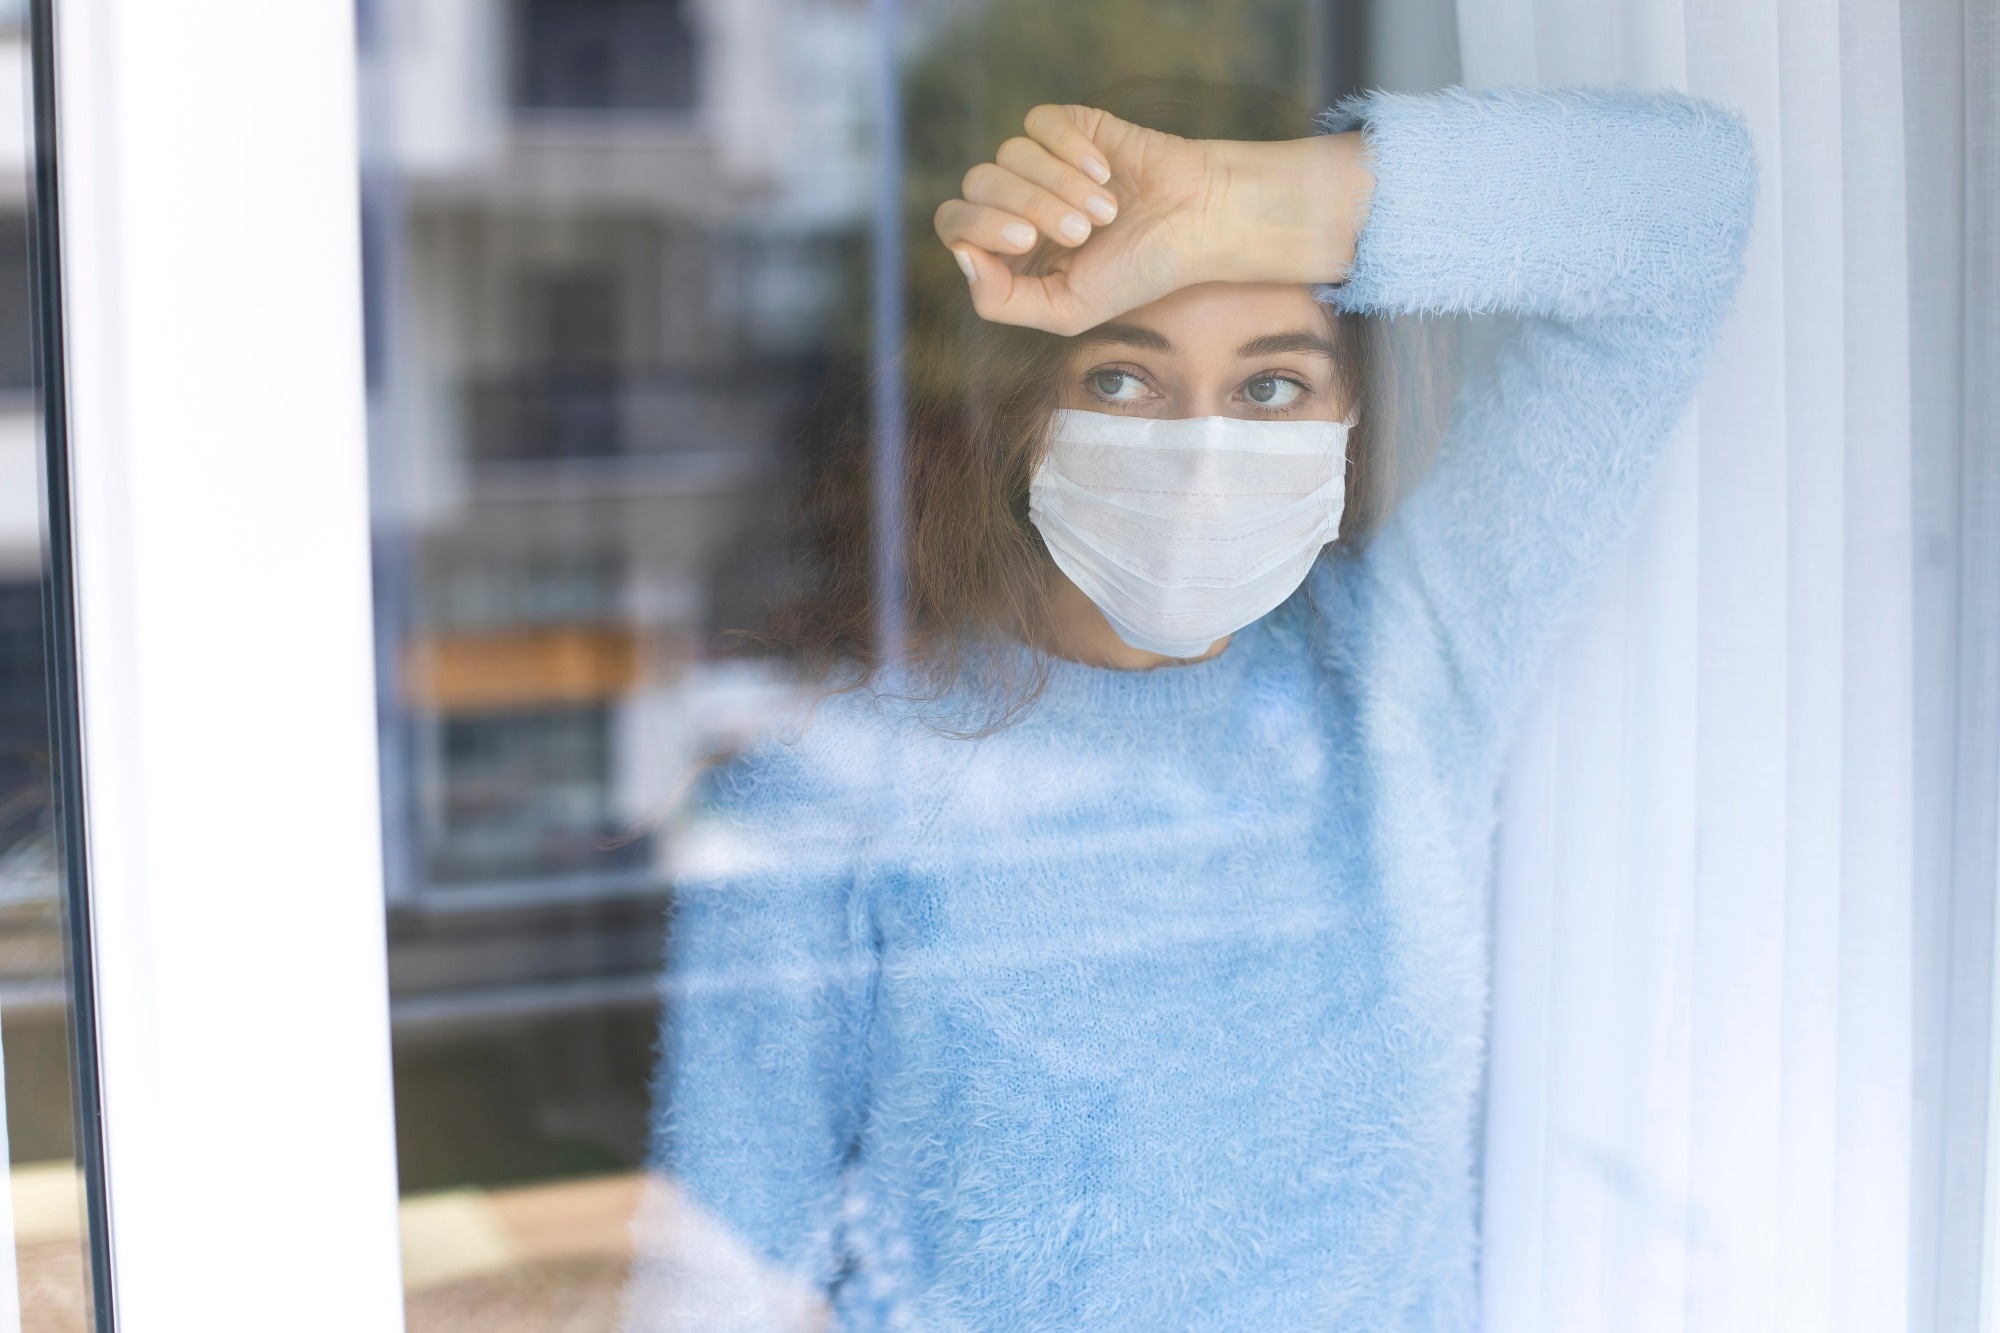 Study: How COVID-19 shaped mental health: from infection to pandemic effects. Image Credit: Ahmet Misirligul/Shutterstock